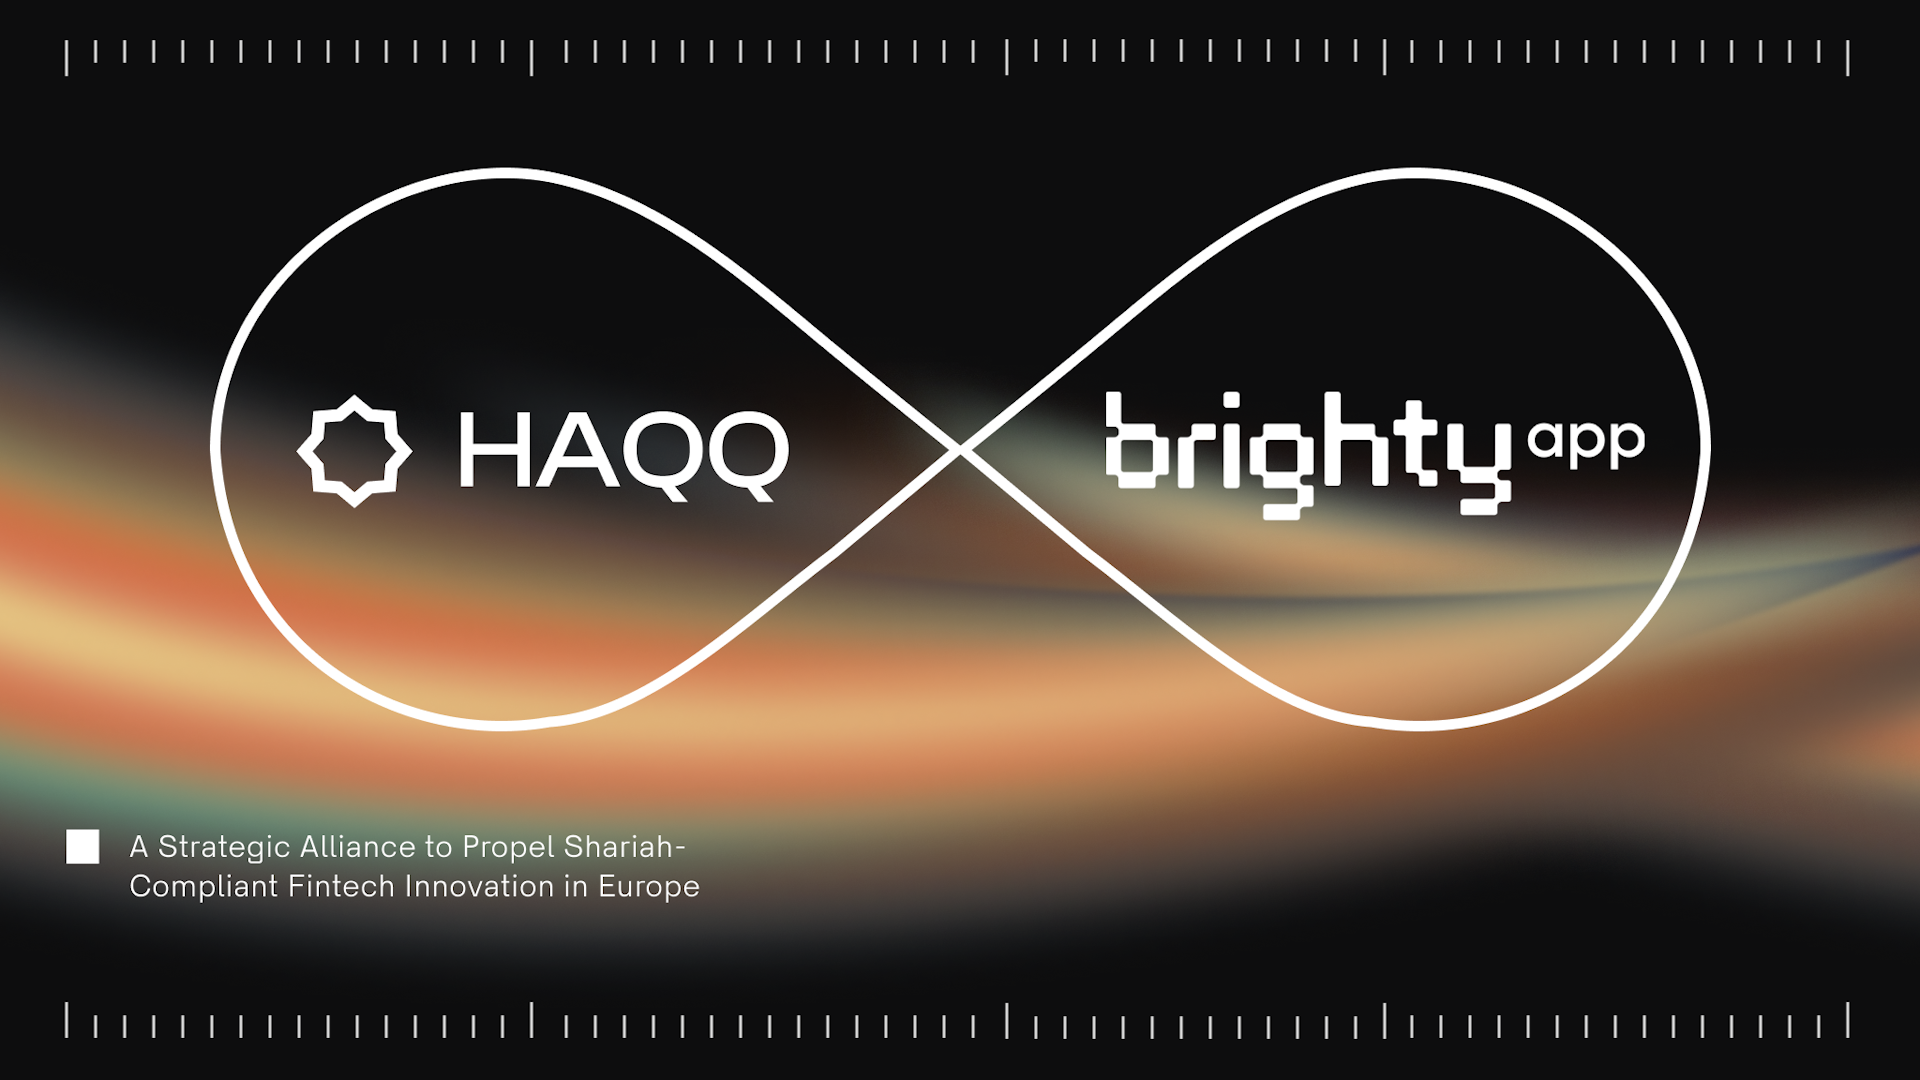 HAQQ and Brighty app: A Strategic Alliance to Propel Shariah-Compliant Fintech Innovation in Europe